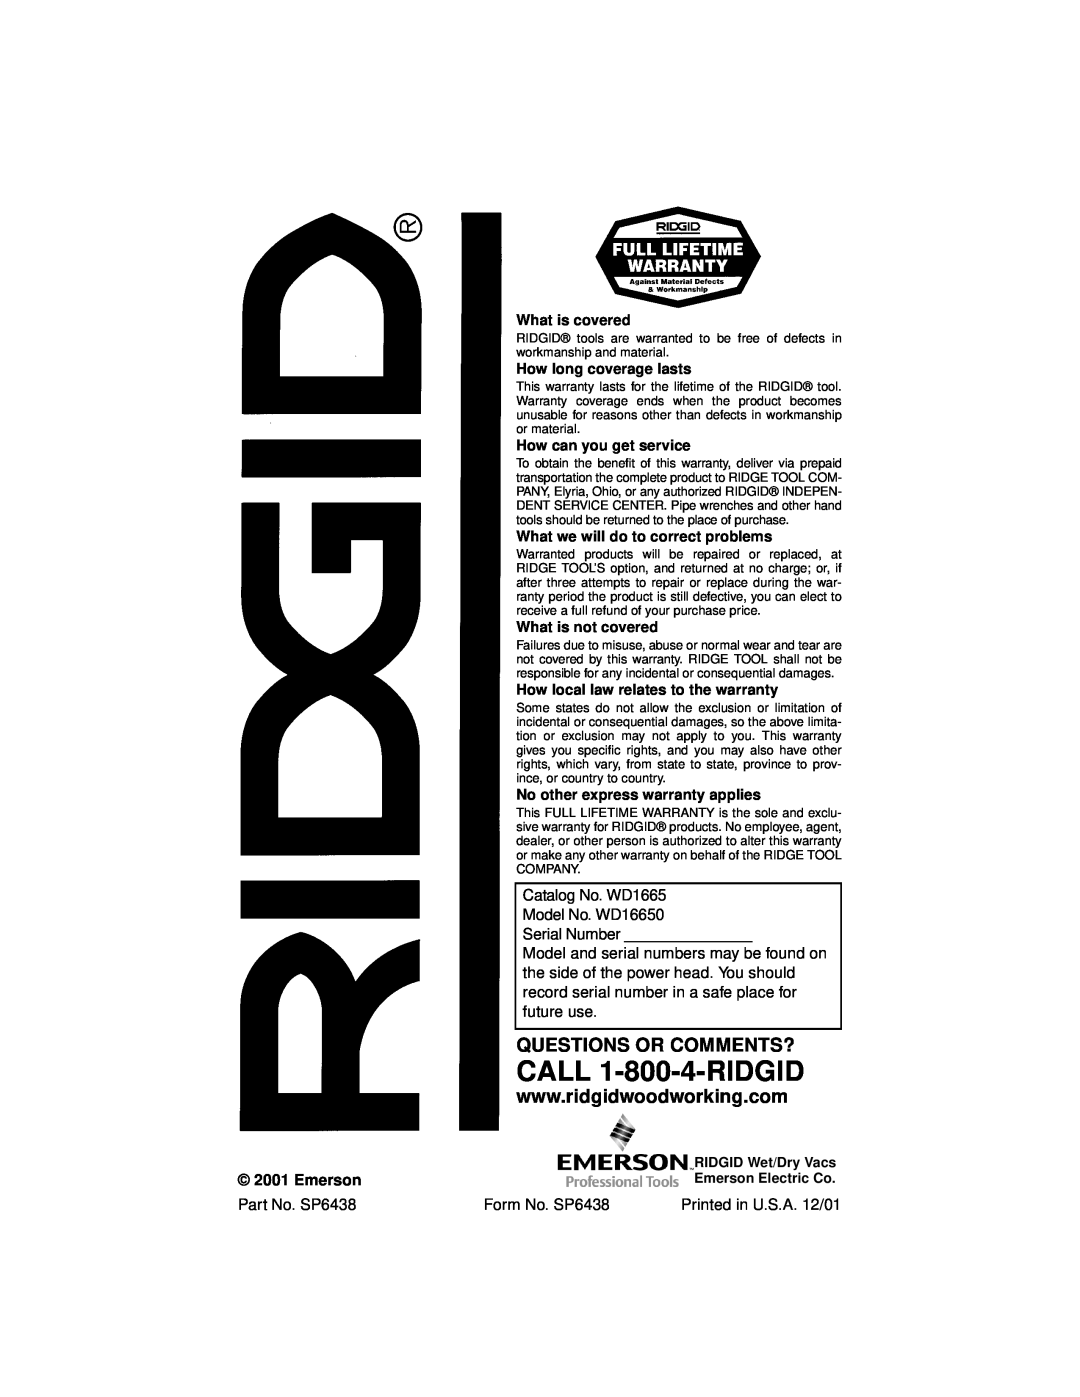 RIDGID WD1665 CALL 1-800-4-RIDGID, Questions Or Comments?, What is covered, How long coverage lasts, What is not covered 